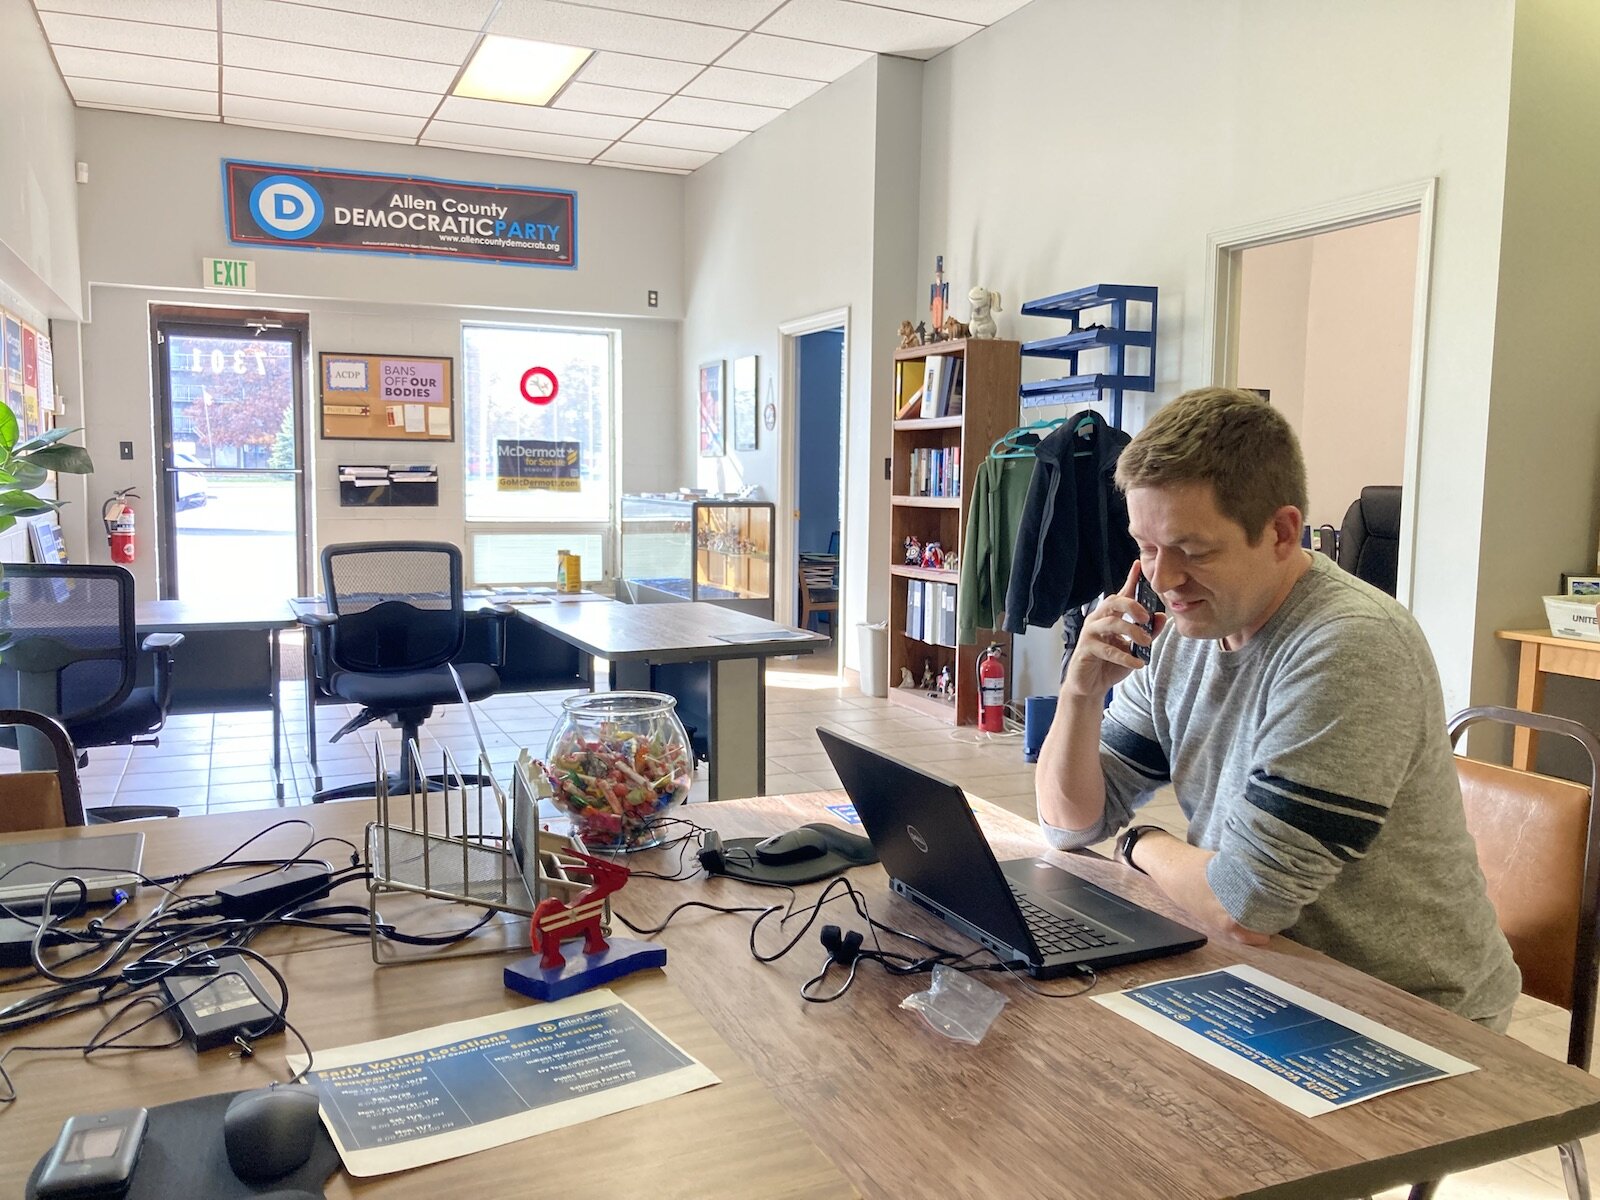 Chad Wiershinzki, Executive Director of Allen County Democrats, makes a phone call at party headquarters at 7301 Decatur Rd.